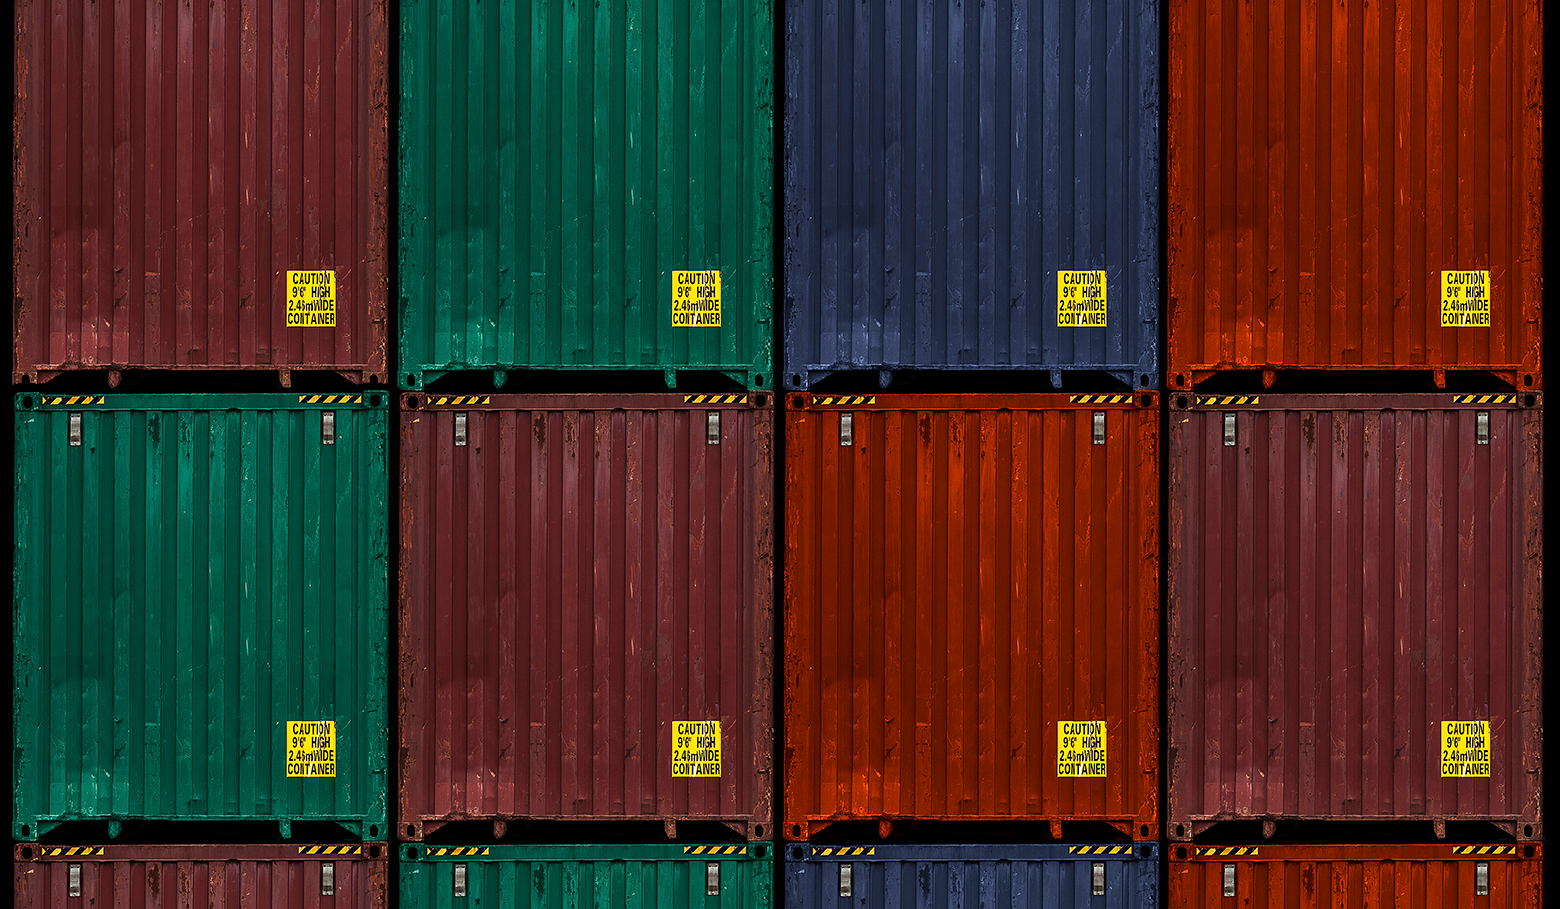 Your Guide to FCL (Full Container Load) - The Pros and Cons